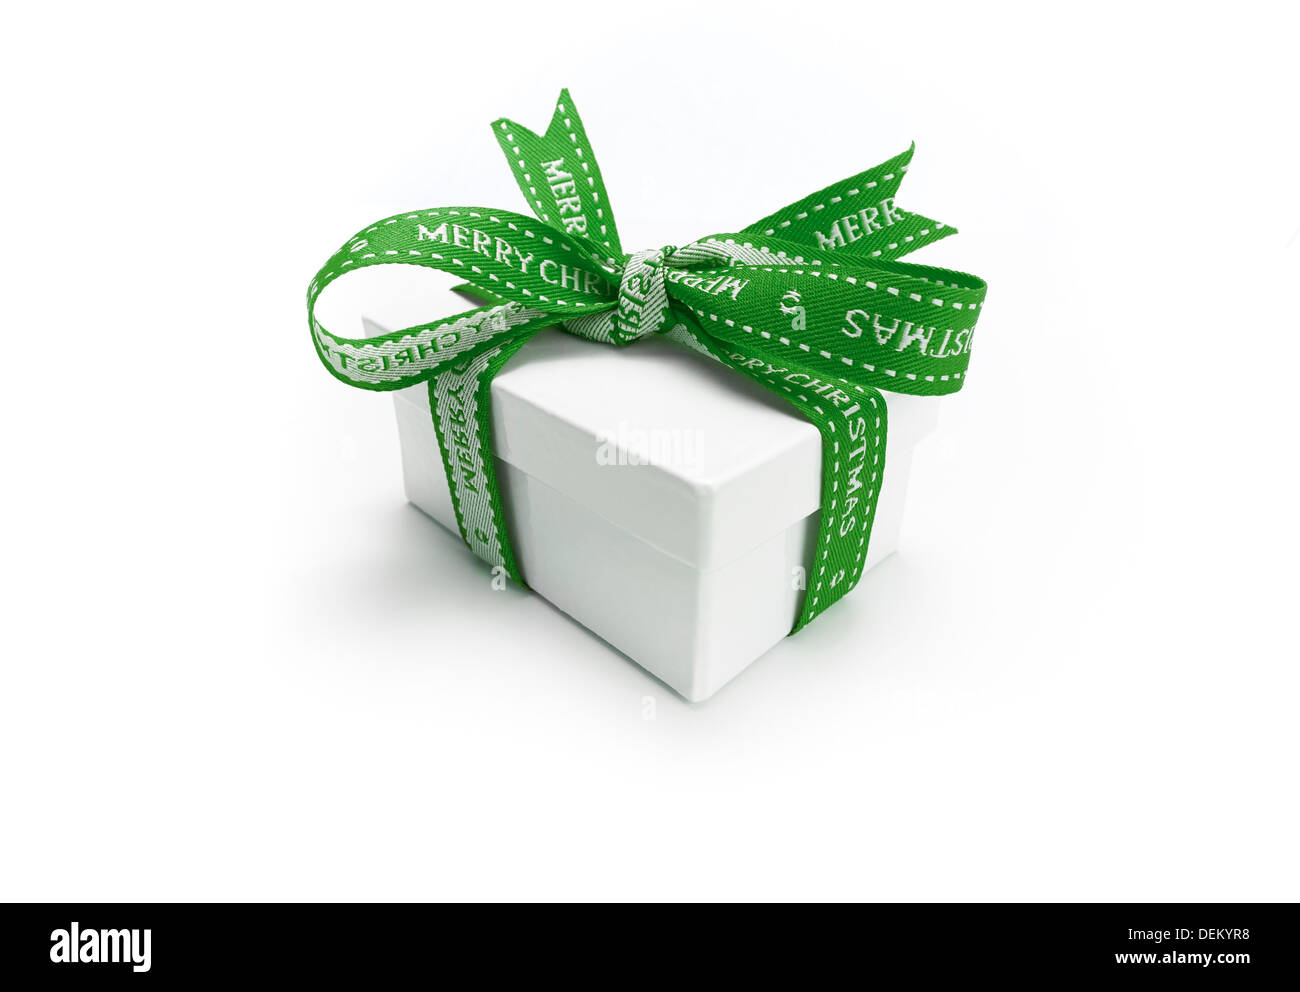 A wrapped Christmas present with a colourful green ribbon and bow on a white background. Stock Photo